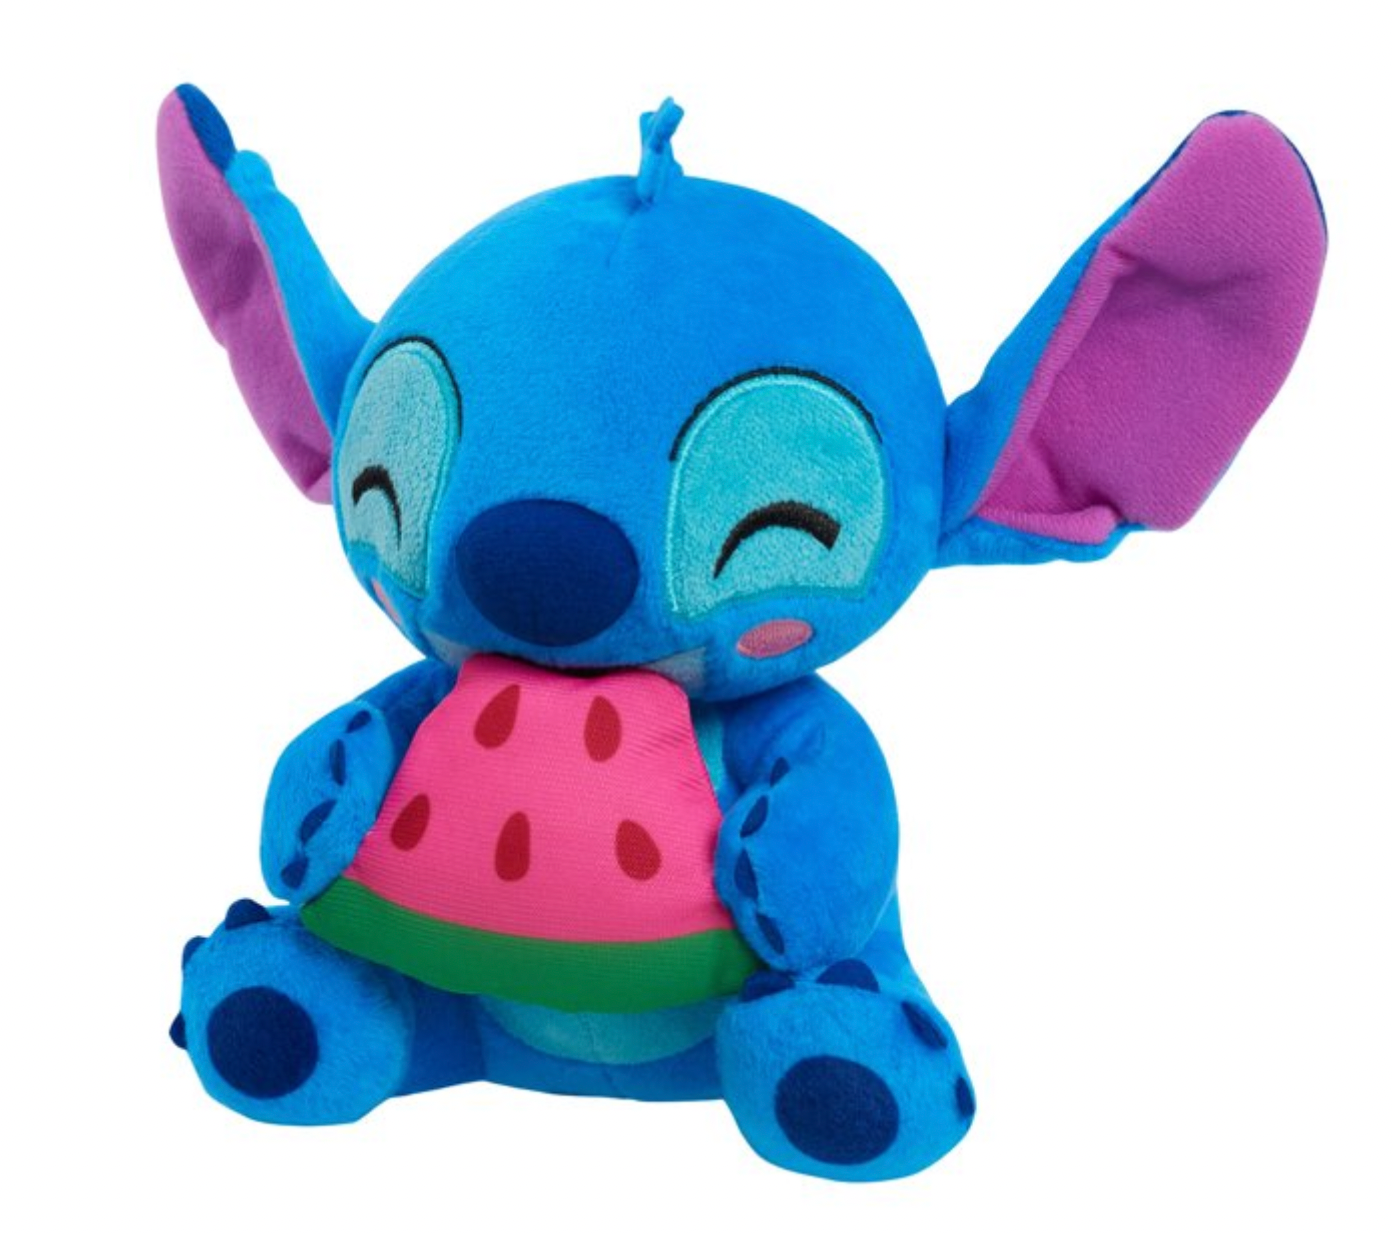 Disney Lilo and Stitch Plush Small Plush with Watermelon Kids Toys New with Tag